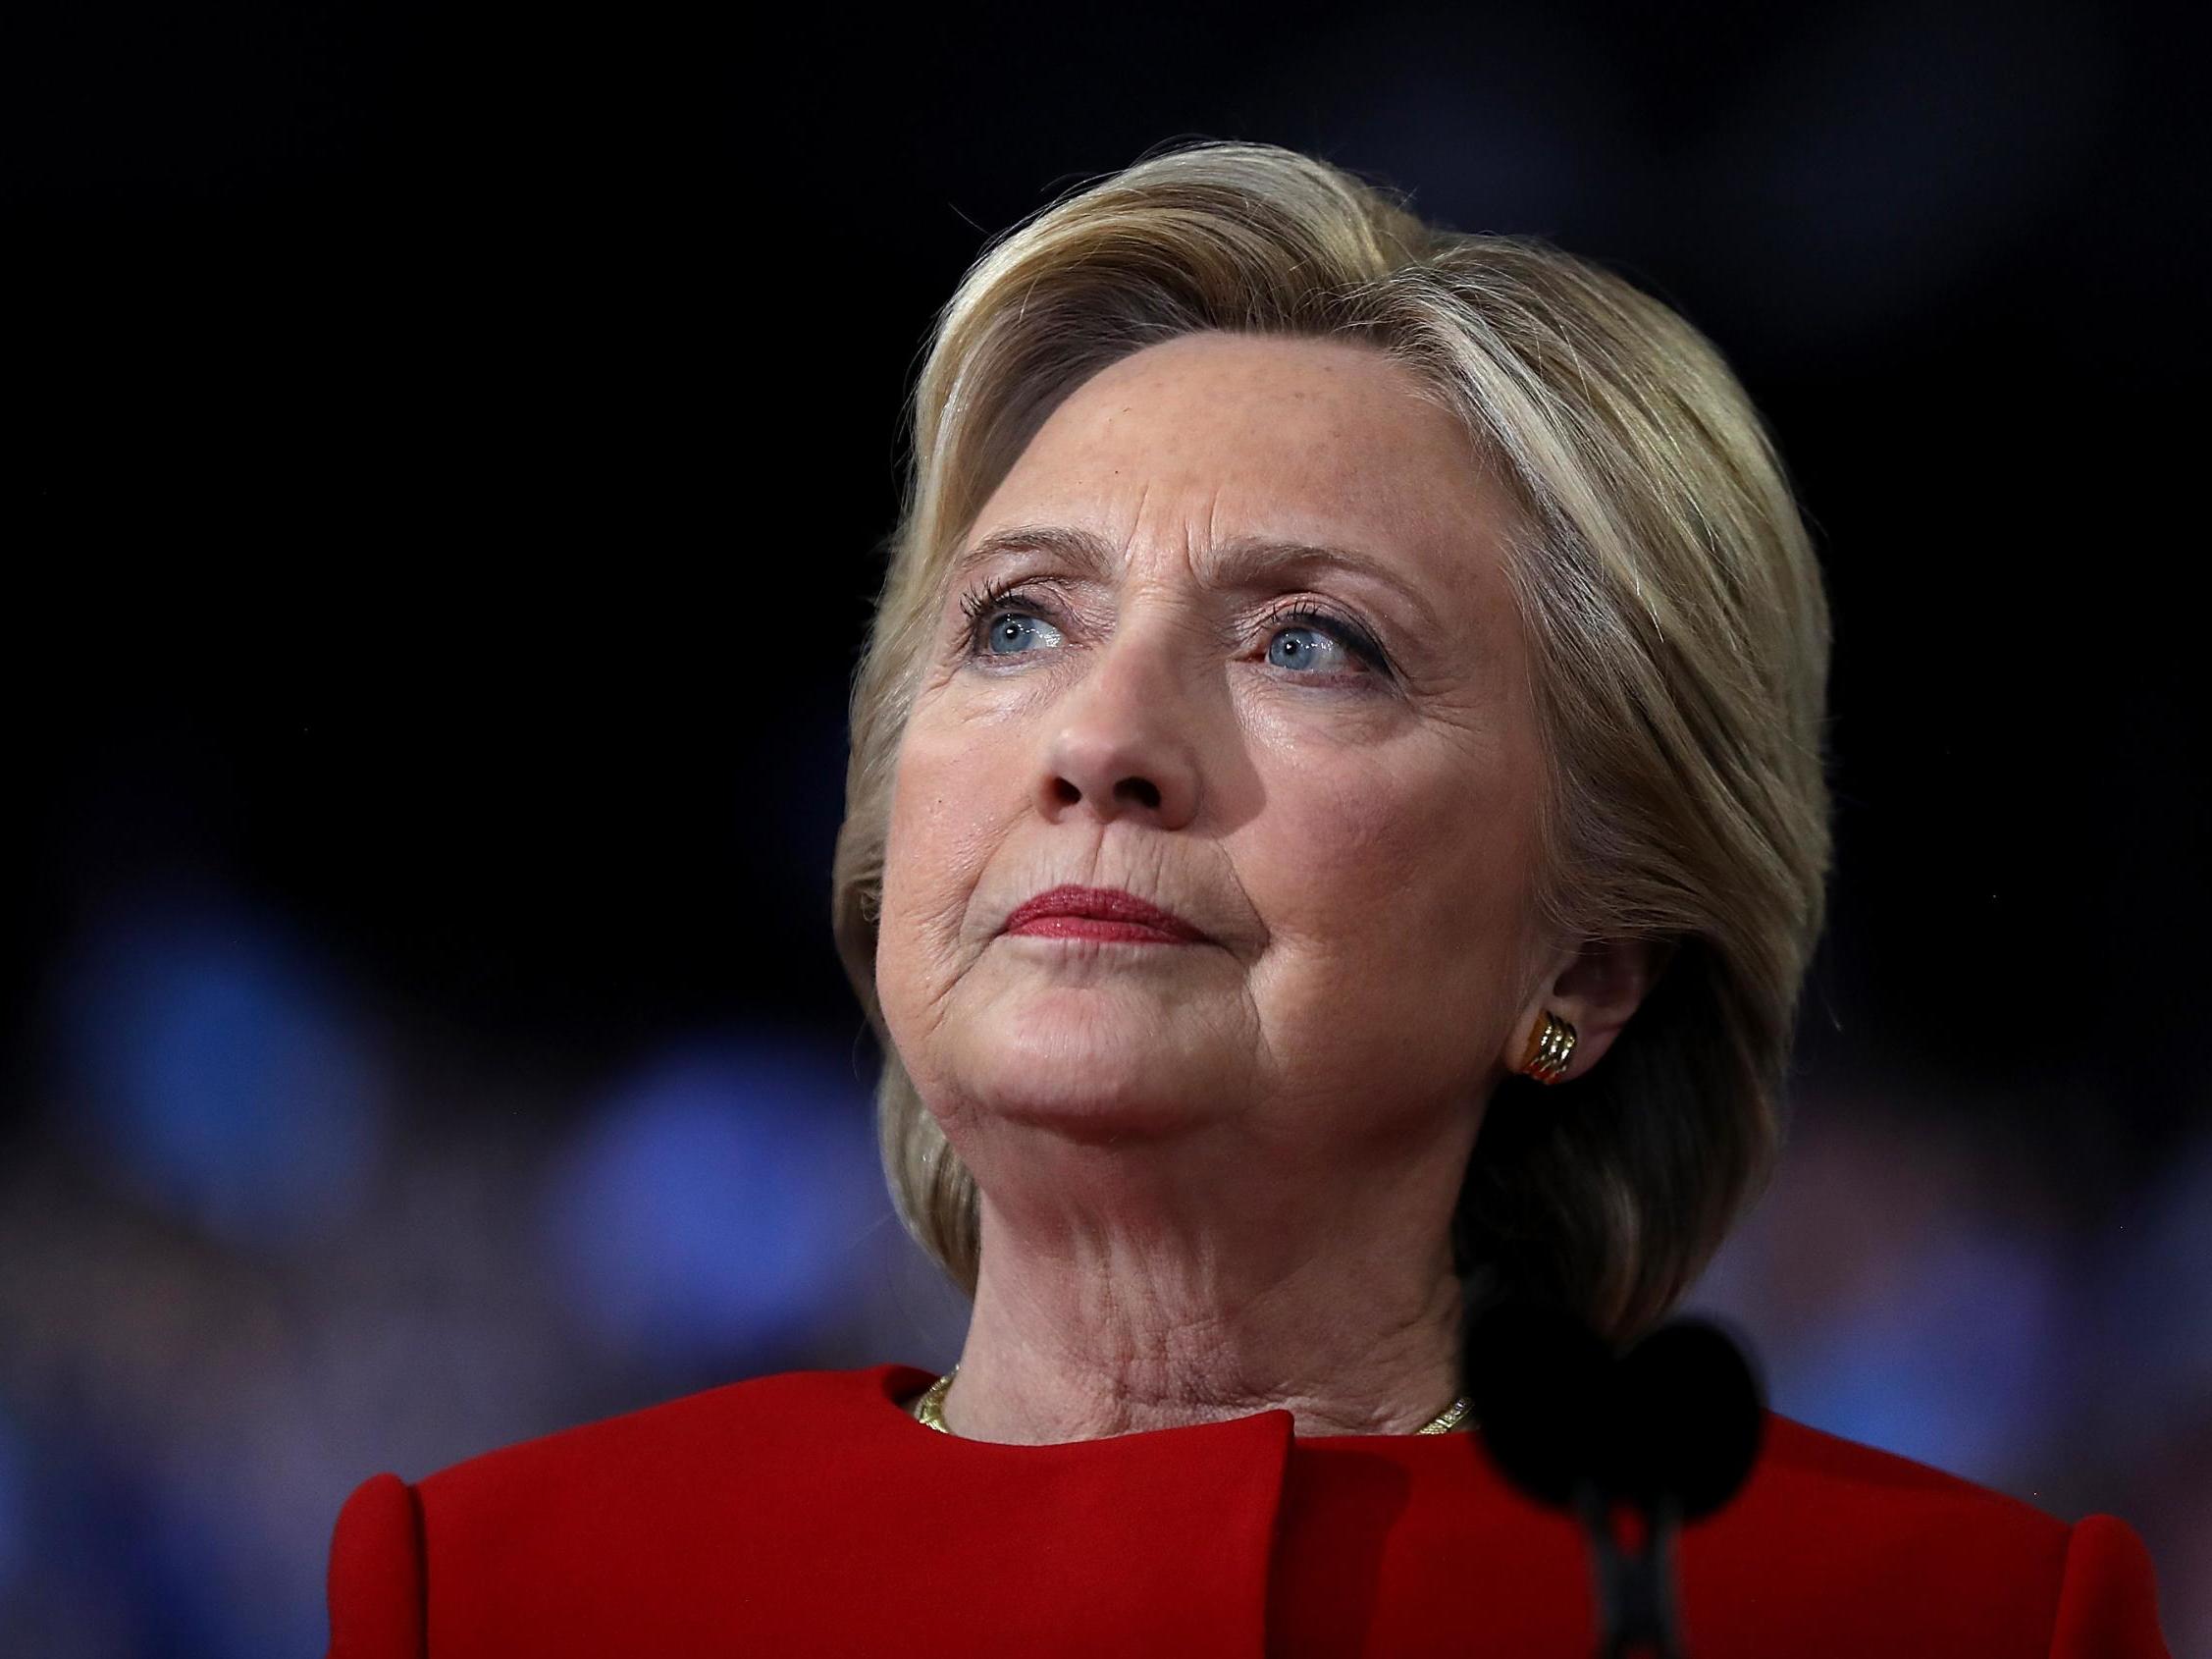 Hillary Clinton said the next election will have a 'profound' impact on the country while urging Americans to vote for whoever they believe is 'most likely to win'.